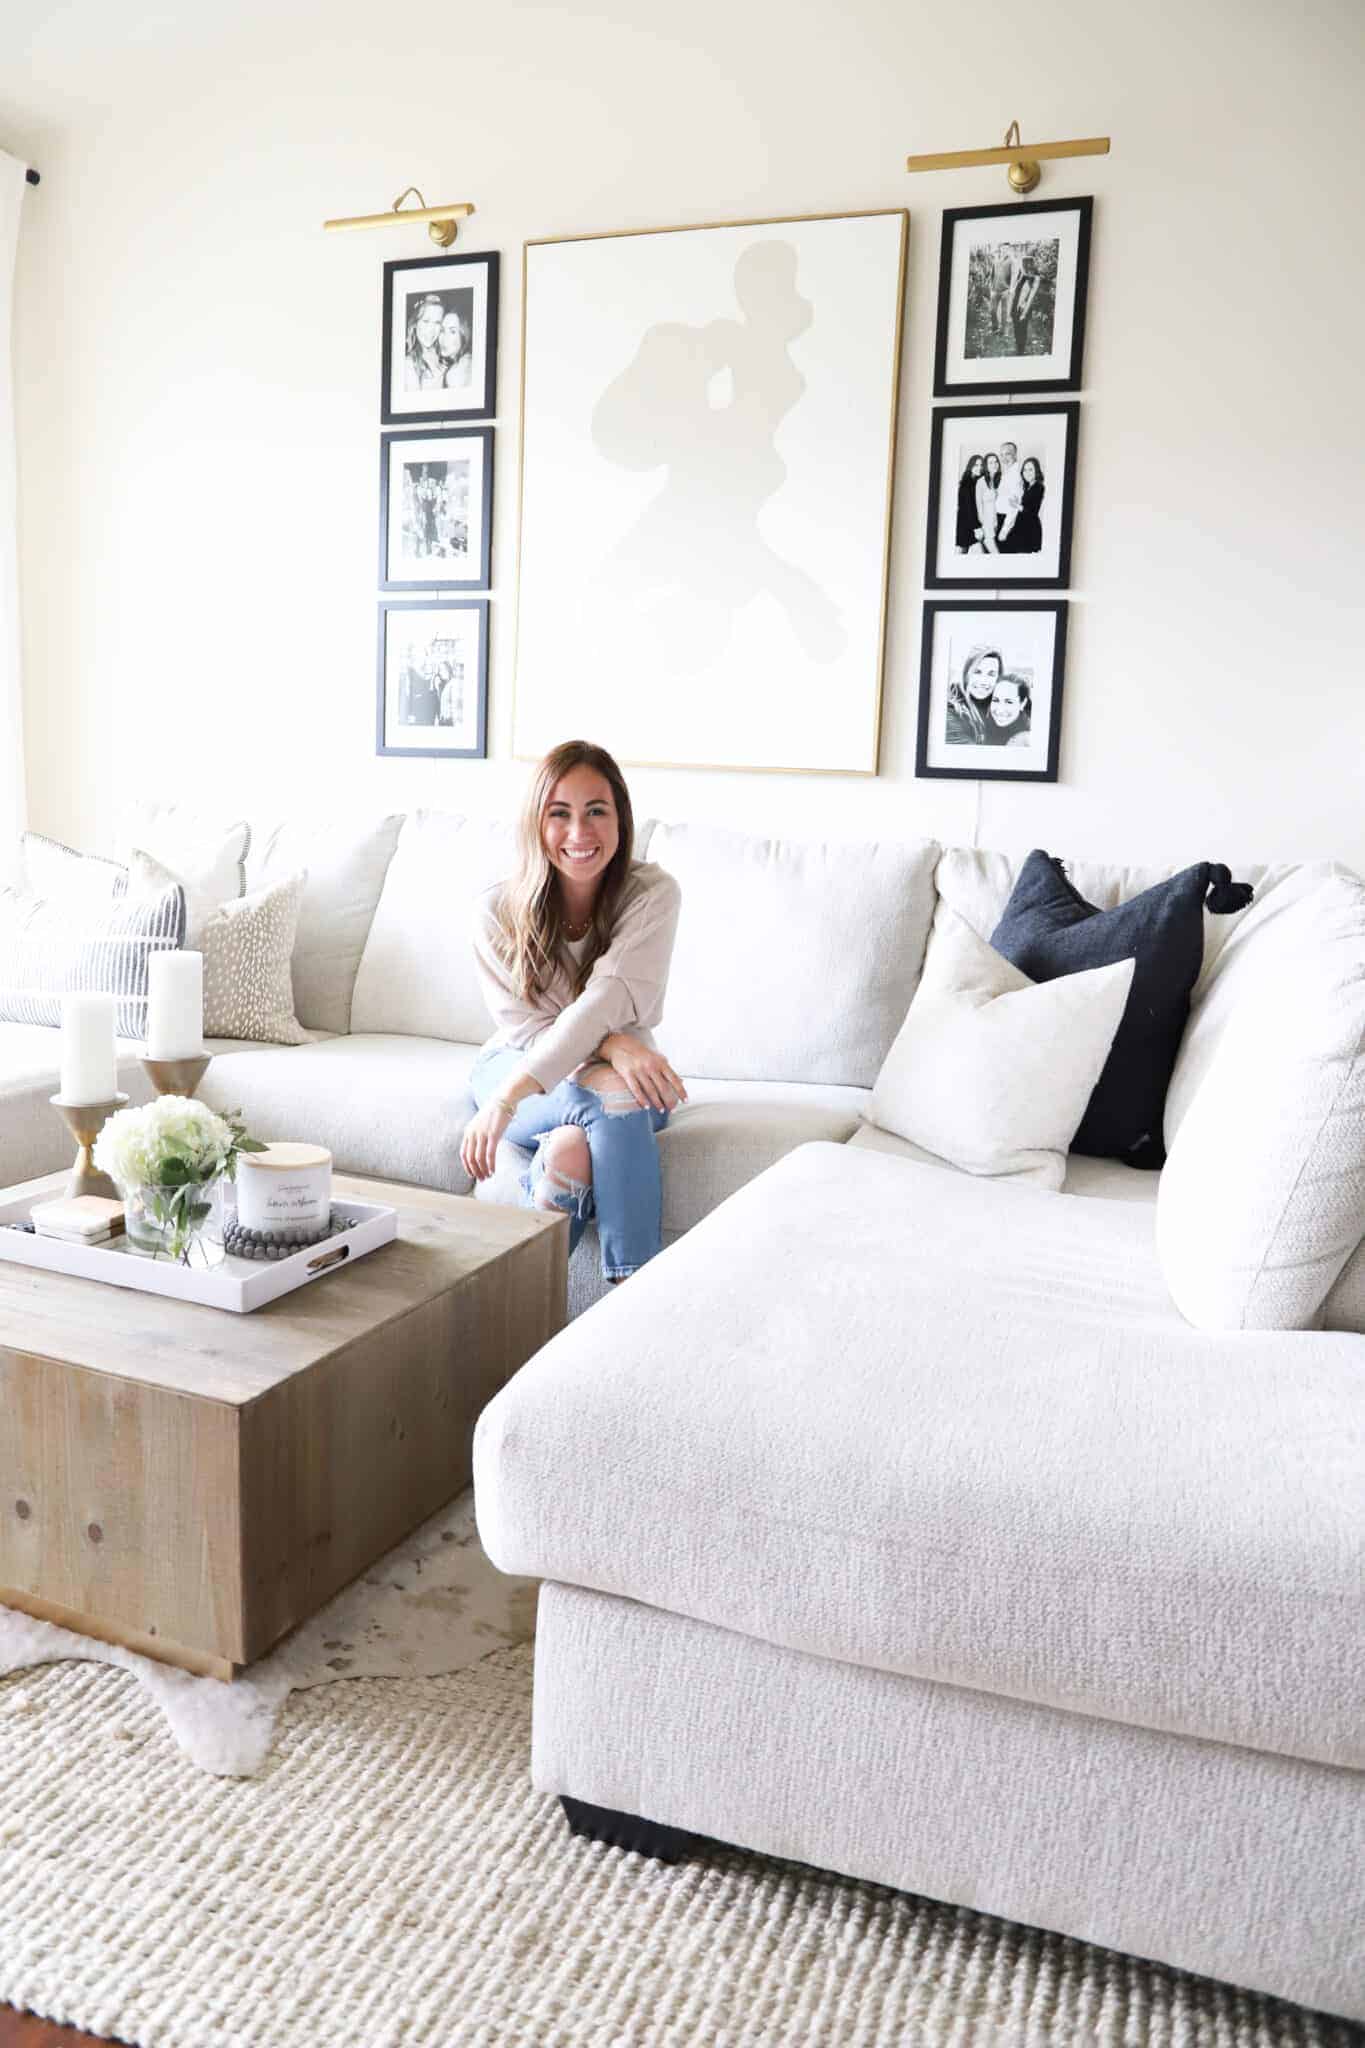 12 Genius Apartment Decorating Ideas on a Budget You Can Easily Recreate -  By Sophia Lee